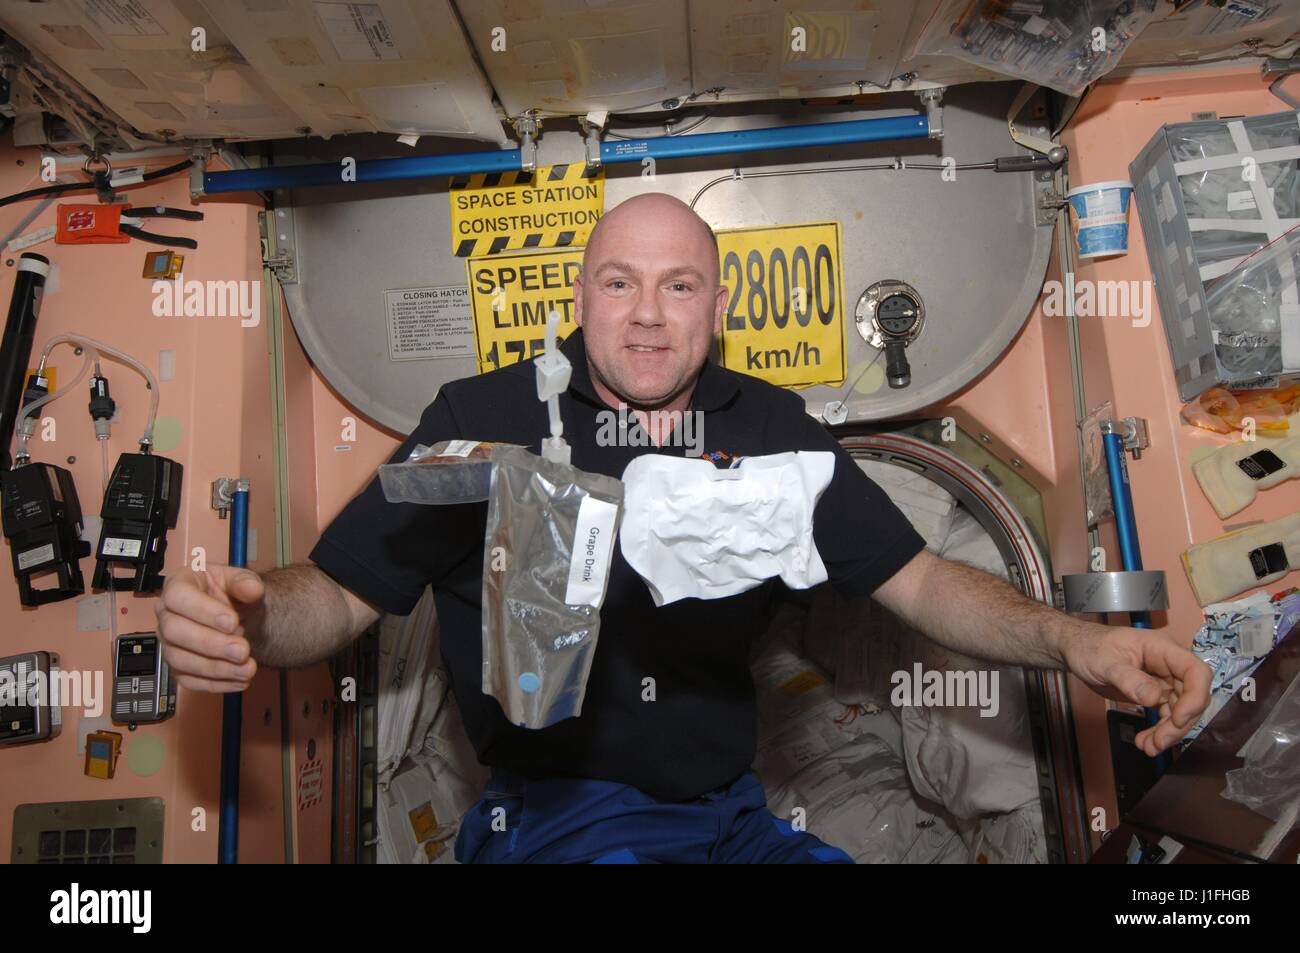 NASA International Space Station Expedition 30 prime crew member Dutch astronaut Andre Kuipers of the European Space Agency floats next to food and drink packets in Node 1 of the ISS January 30, 2012 in Earth orbit.      (photo by NASA Photo /NASA   via Planetpix) Stock Photo